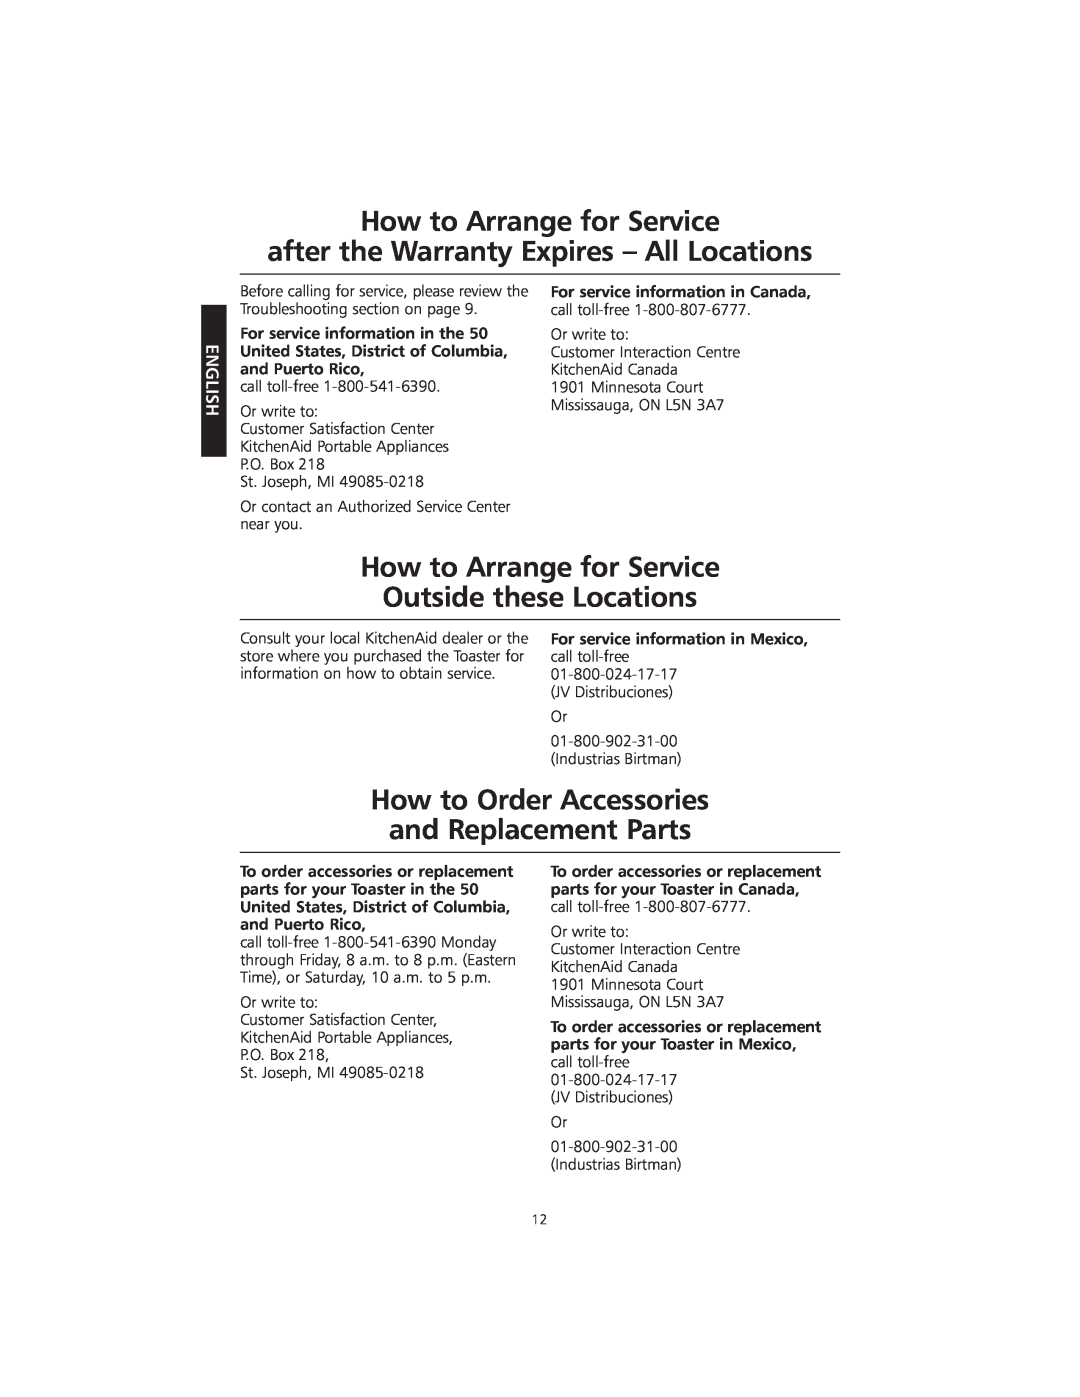 KitchenAid KMTT400 manual How to Arrange for Service, after the Warranty Expires - All Locations, Outside these Locations 